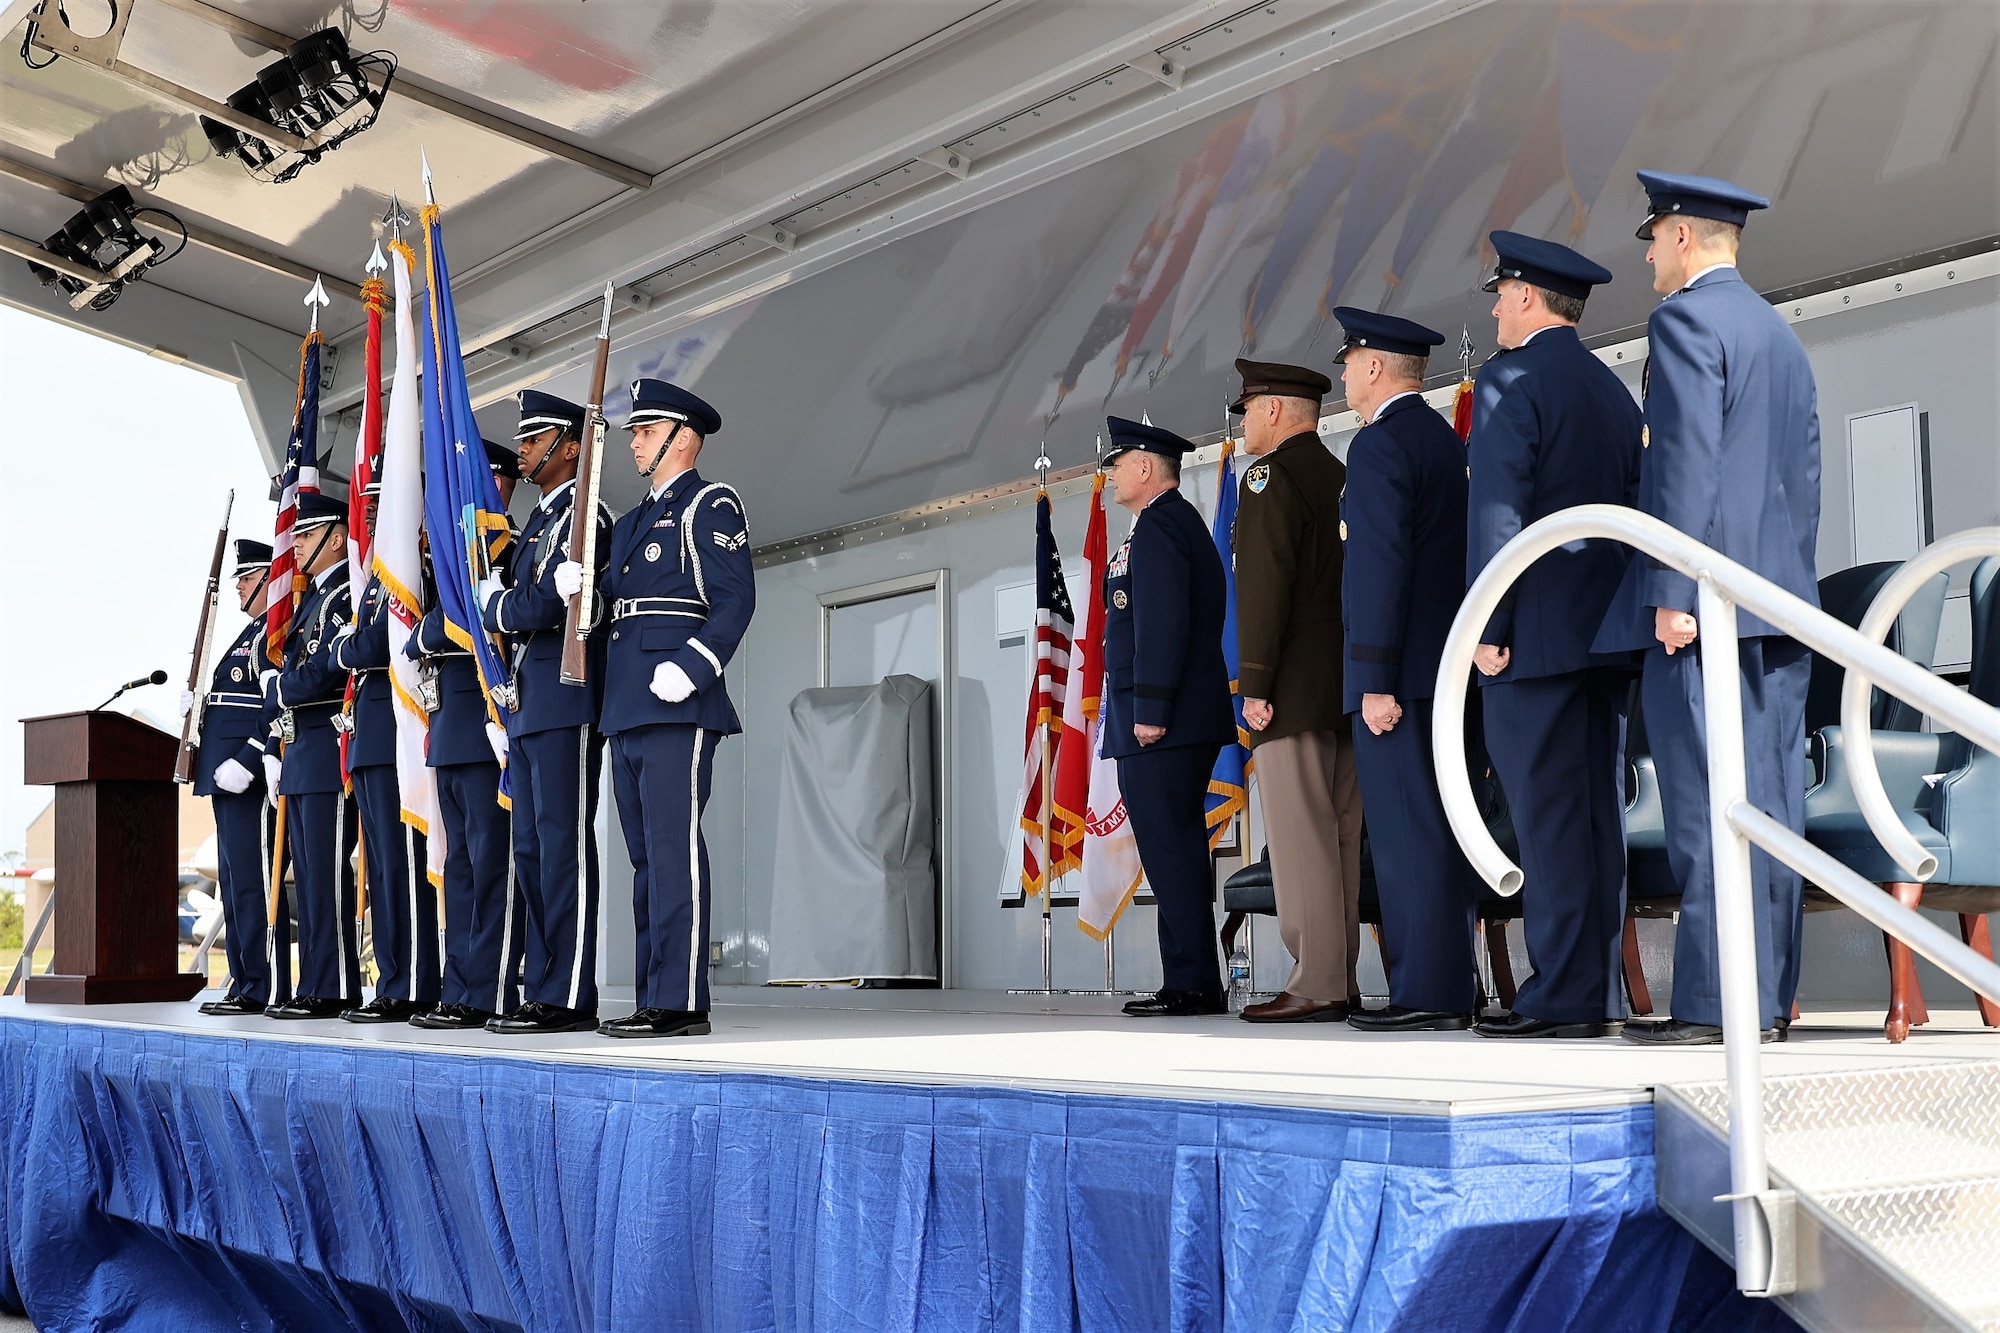 Leadership of the Continental U.S.  North American Aerospace Defense Command Region – First Air Force (Air Forces Northern and Air Forces Space) changed hands during a change of command ceremony, March 31,2023 at Tyndall AFB, Fla. Gen. Steven S. Nordhaus assumed command of CONR-1AF (AFNORTH & AFSPACE) from Lt. Gen. Kirk S. Pierce.  Gen. Glen D. VanHerck, commander of NORAD and U.S. Northern Command, Gen. James H. Dickinson, commander of U.S. Space Command, and Gen. Mark D. Kelly, commander of Air Combat Command, presided over the ceremony.